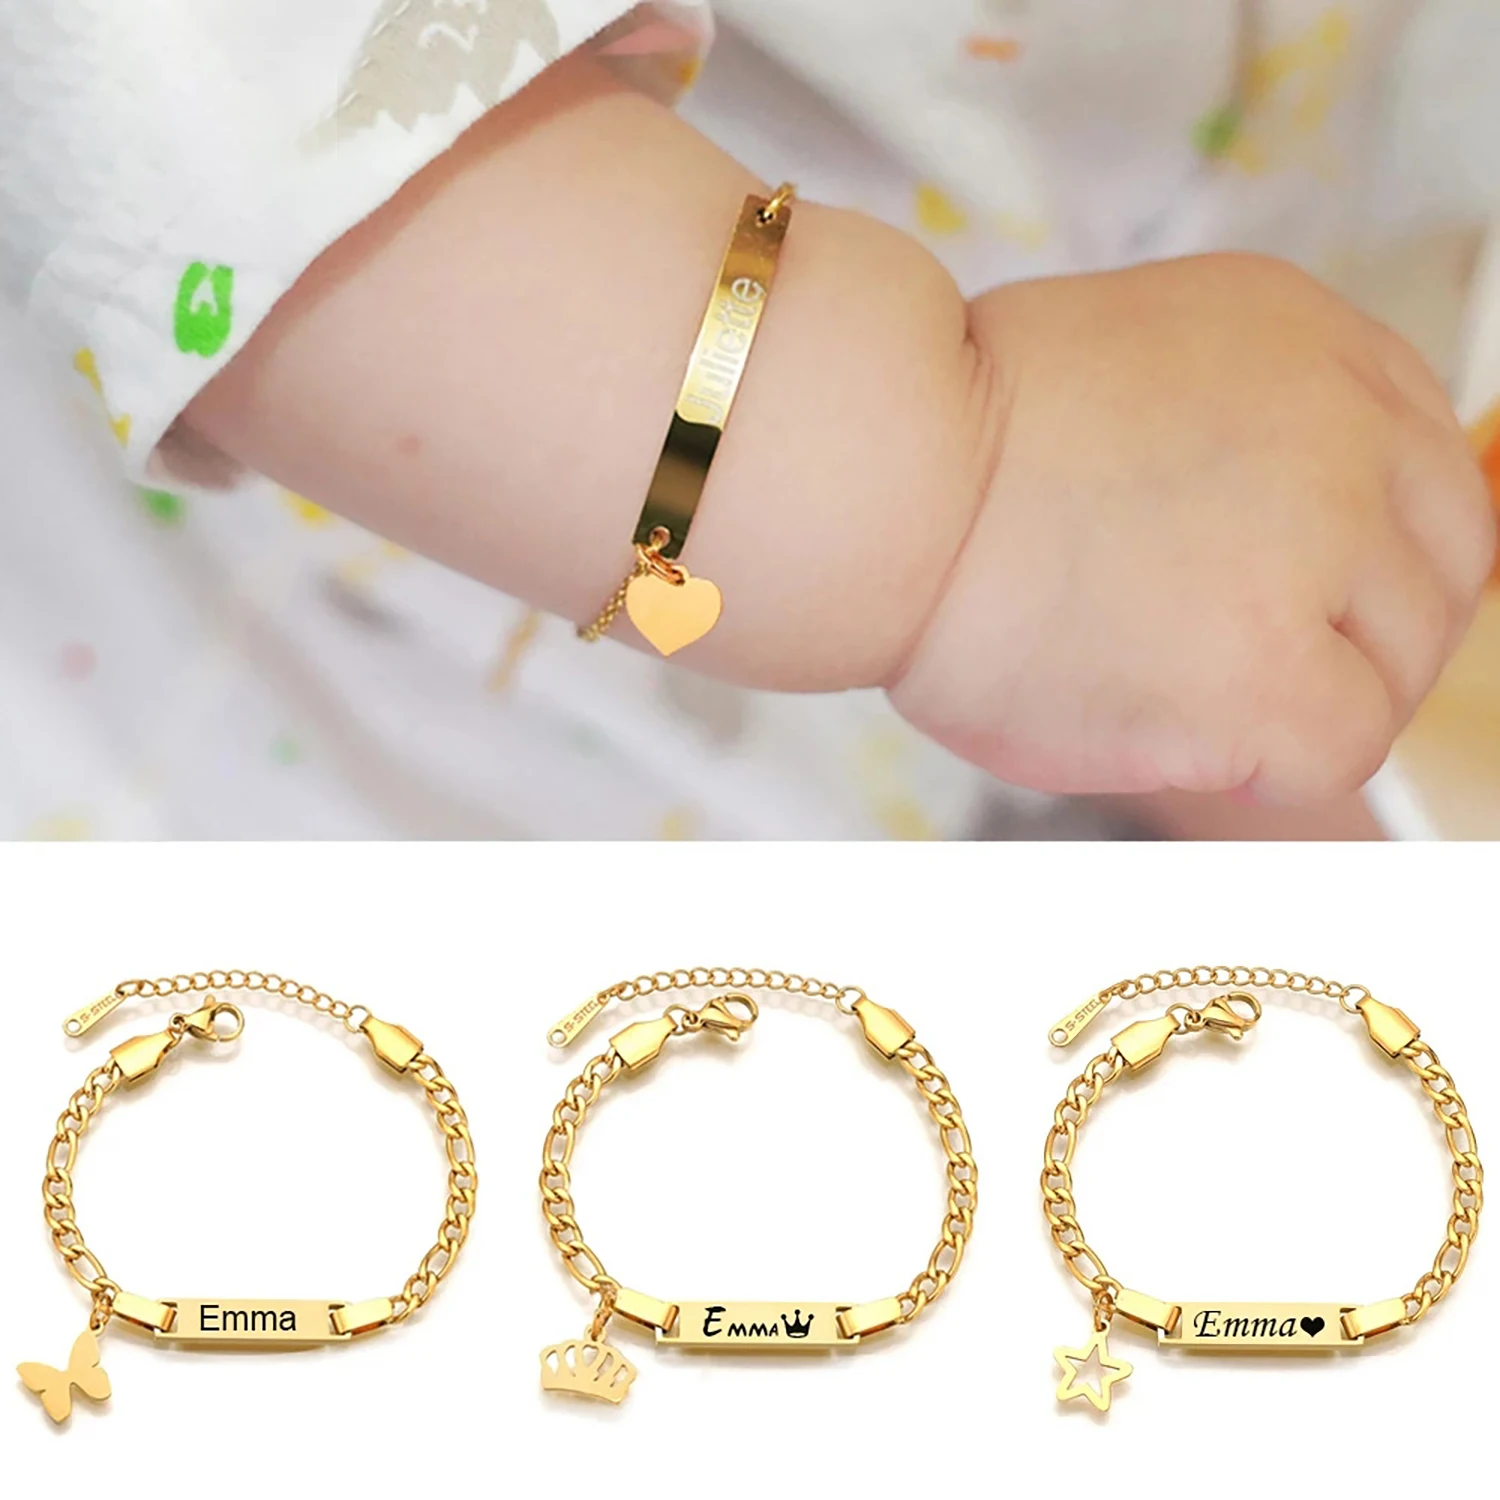 

Personalized Name Baby ID Bracelet Stainless Steel Curb Chain Link Crown Bracelet Engraved Name Letter Date Bracelets Jewelry